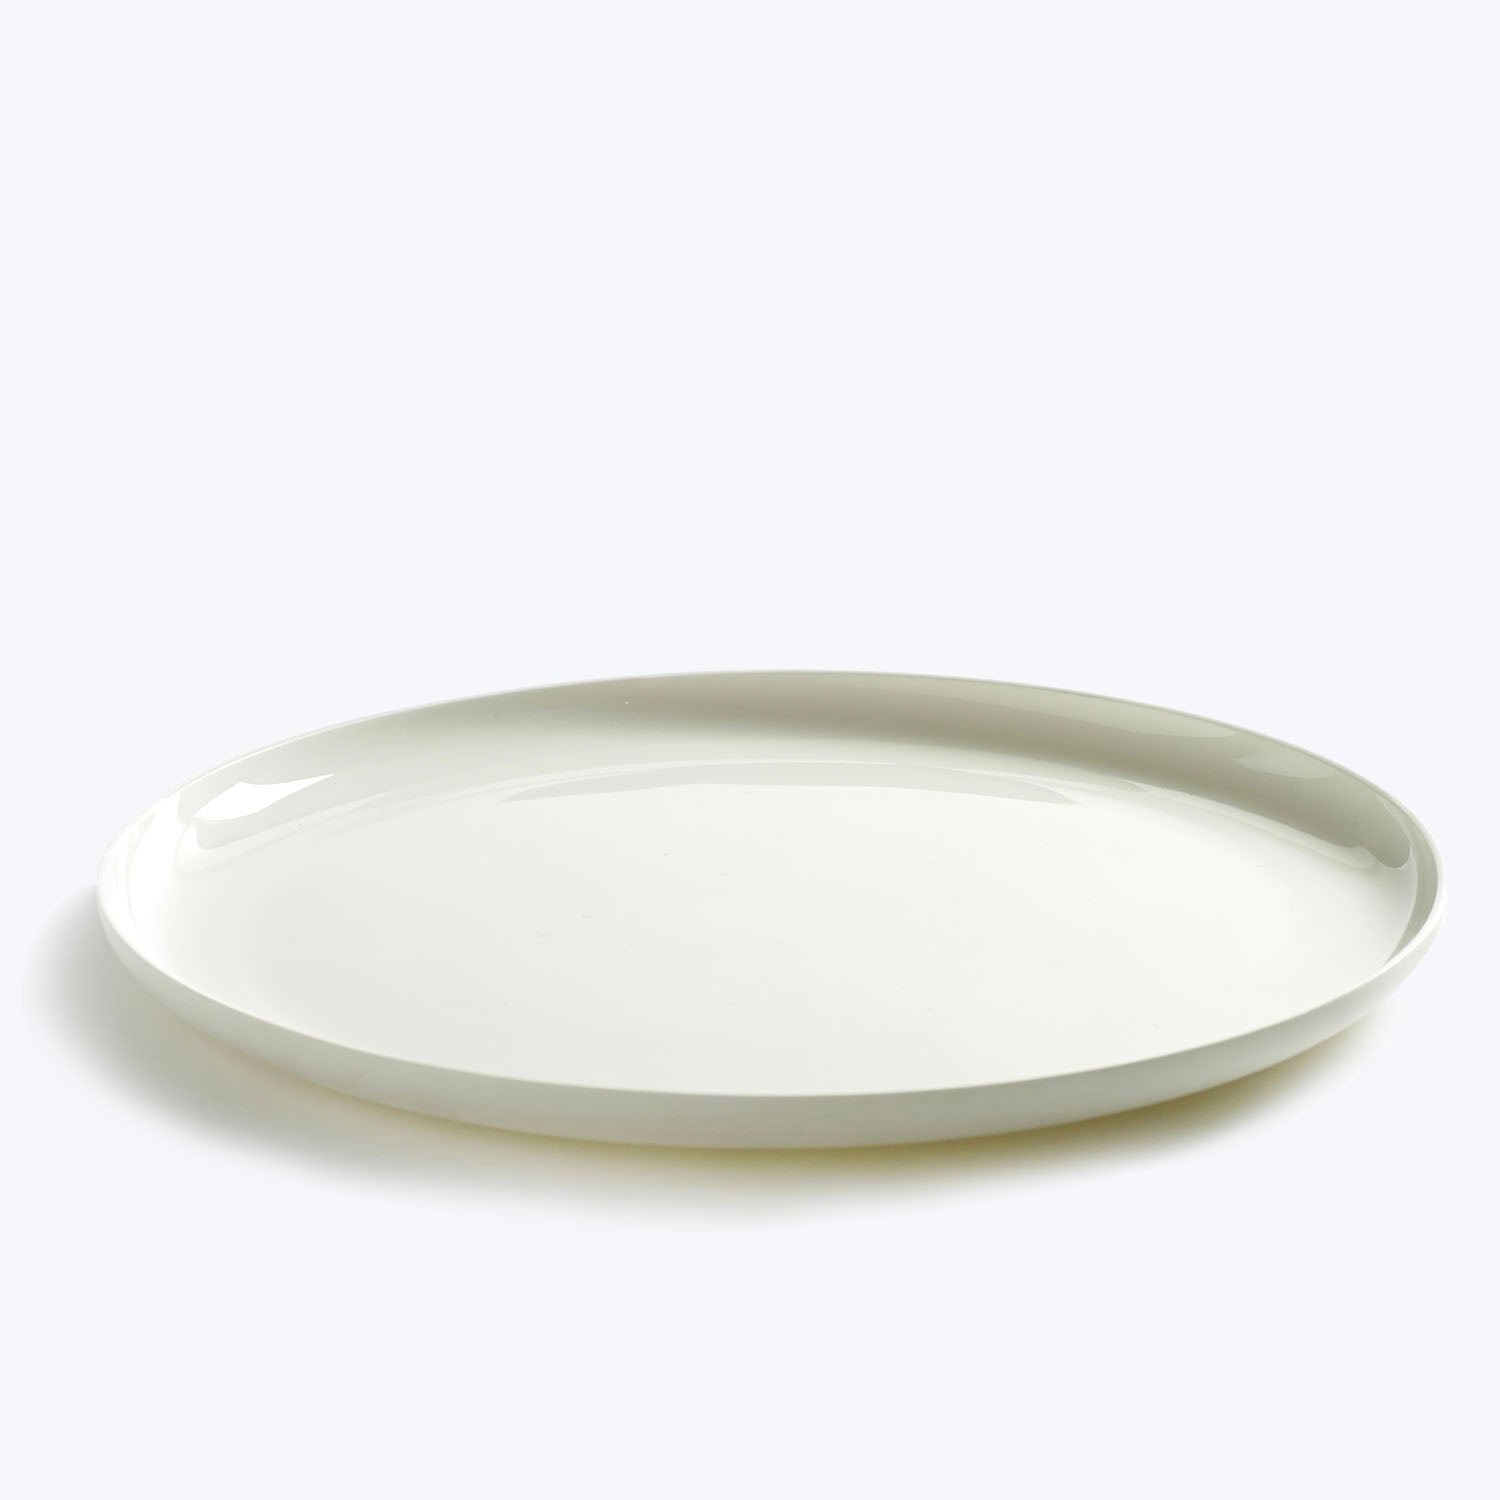 Piet Boon Base Tableware Collection-Matte White-2" (Set of 8)